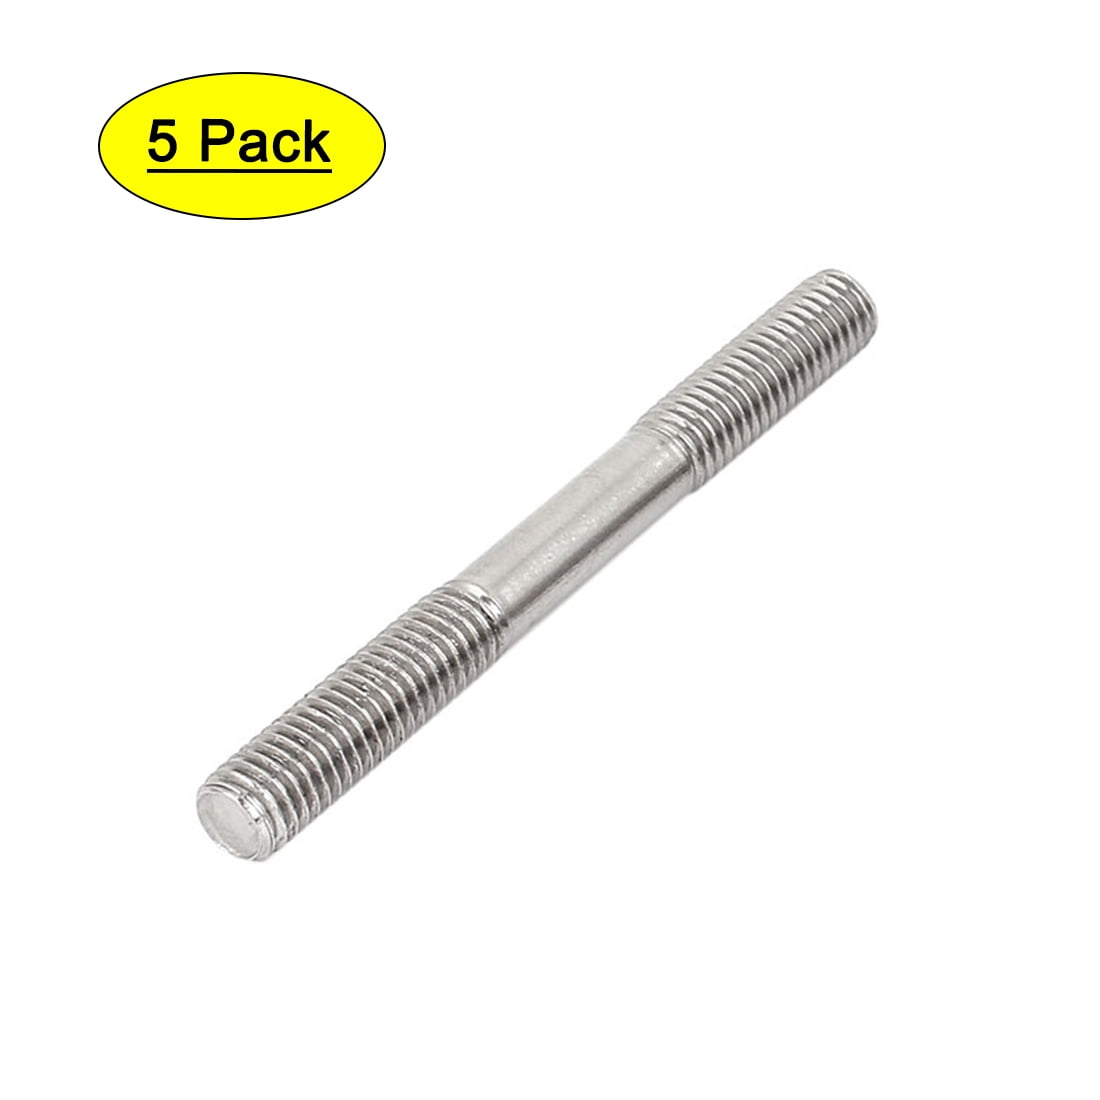 Metric Double-Ended Stud with Plain Center 50 pcs M16-2.0 X 35mm Screw-in End 1.0 X Diameter A4 Stainless Steel DIN 938 